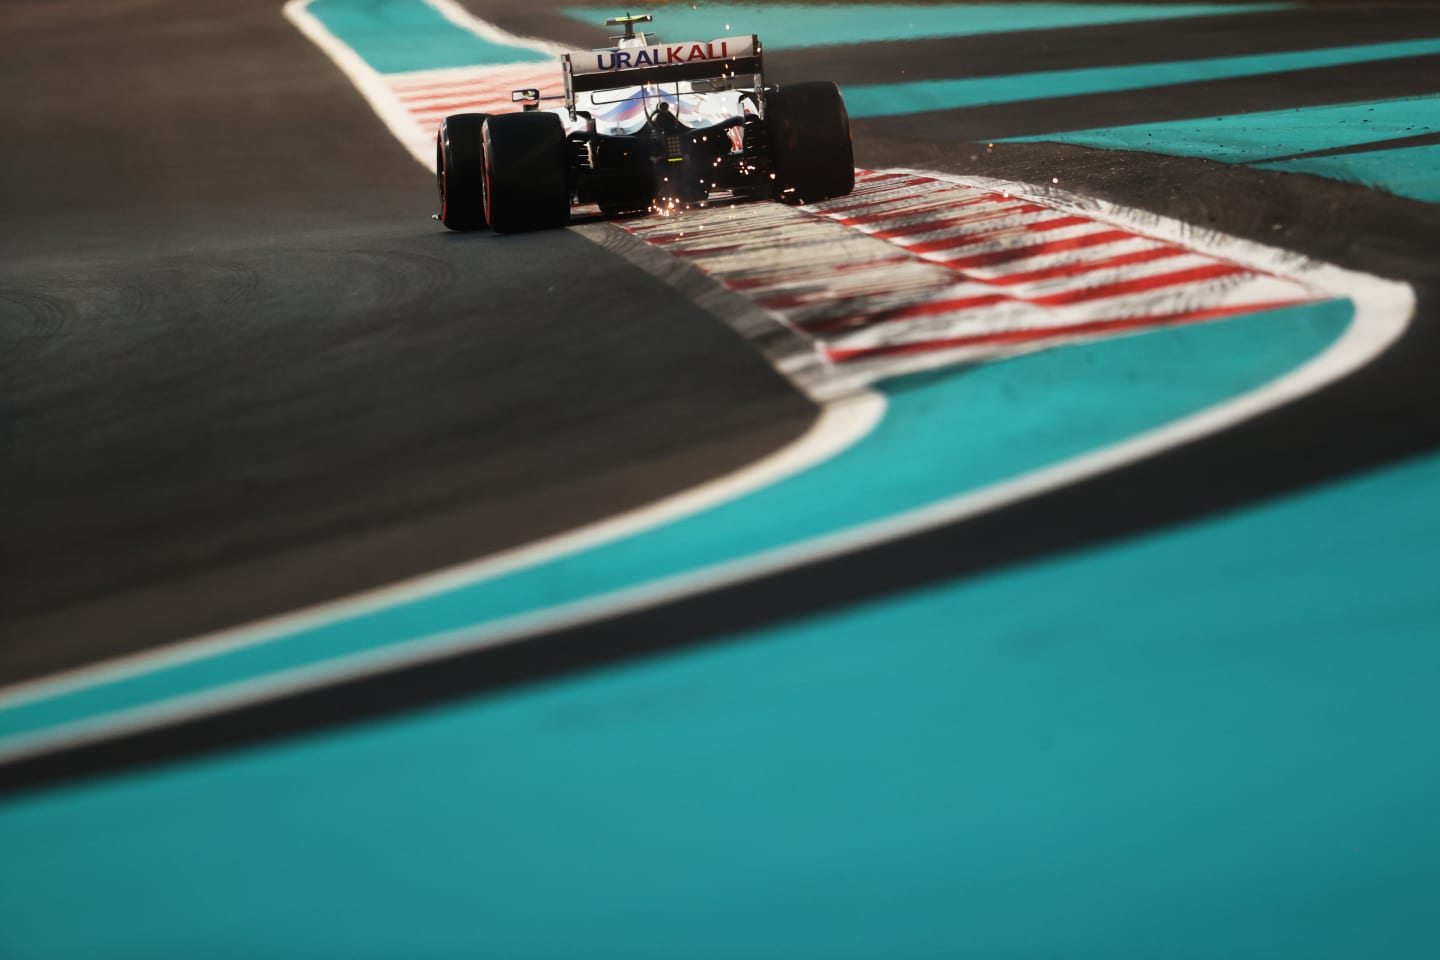 ABU DHABI, UNITED ARAB EMIRATES - DECEMBER 10: Mick Schumacher of Germany driving the (47) Haas F1 Team VF-21 Ferrari during practice ahead of the F1 Grand Prix of Abu Dhabi at Yas Marina Circuit on December 10, 2021 in Abu Dhabi, United Arab Emirates. (Photo by Clive Rose/Getty Images)